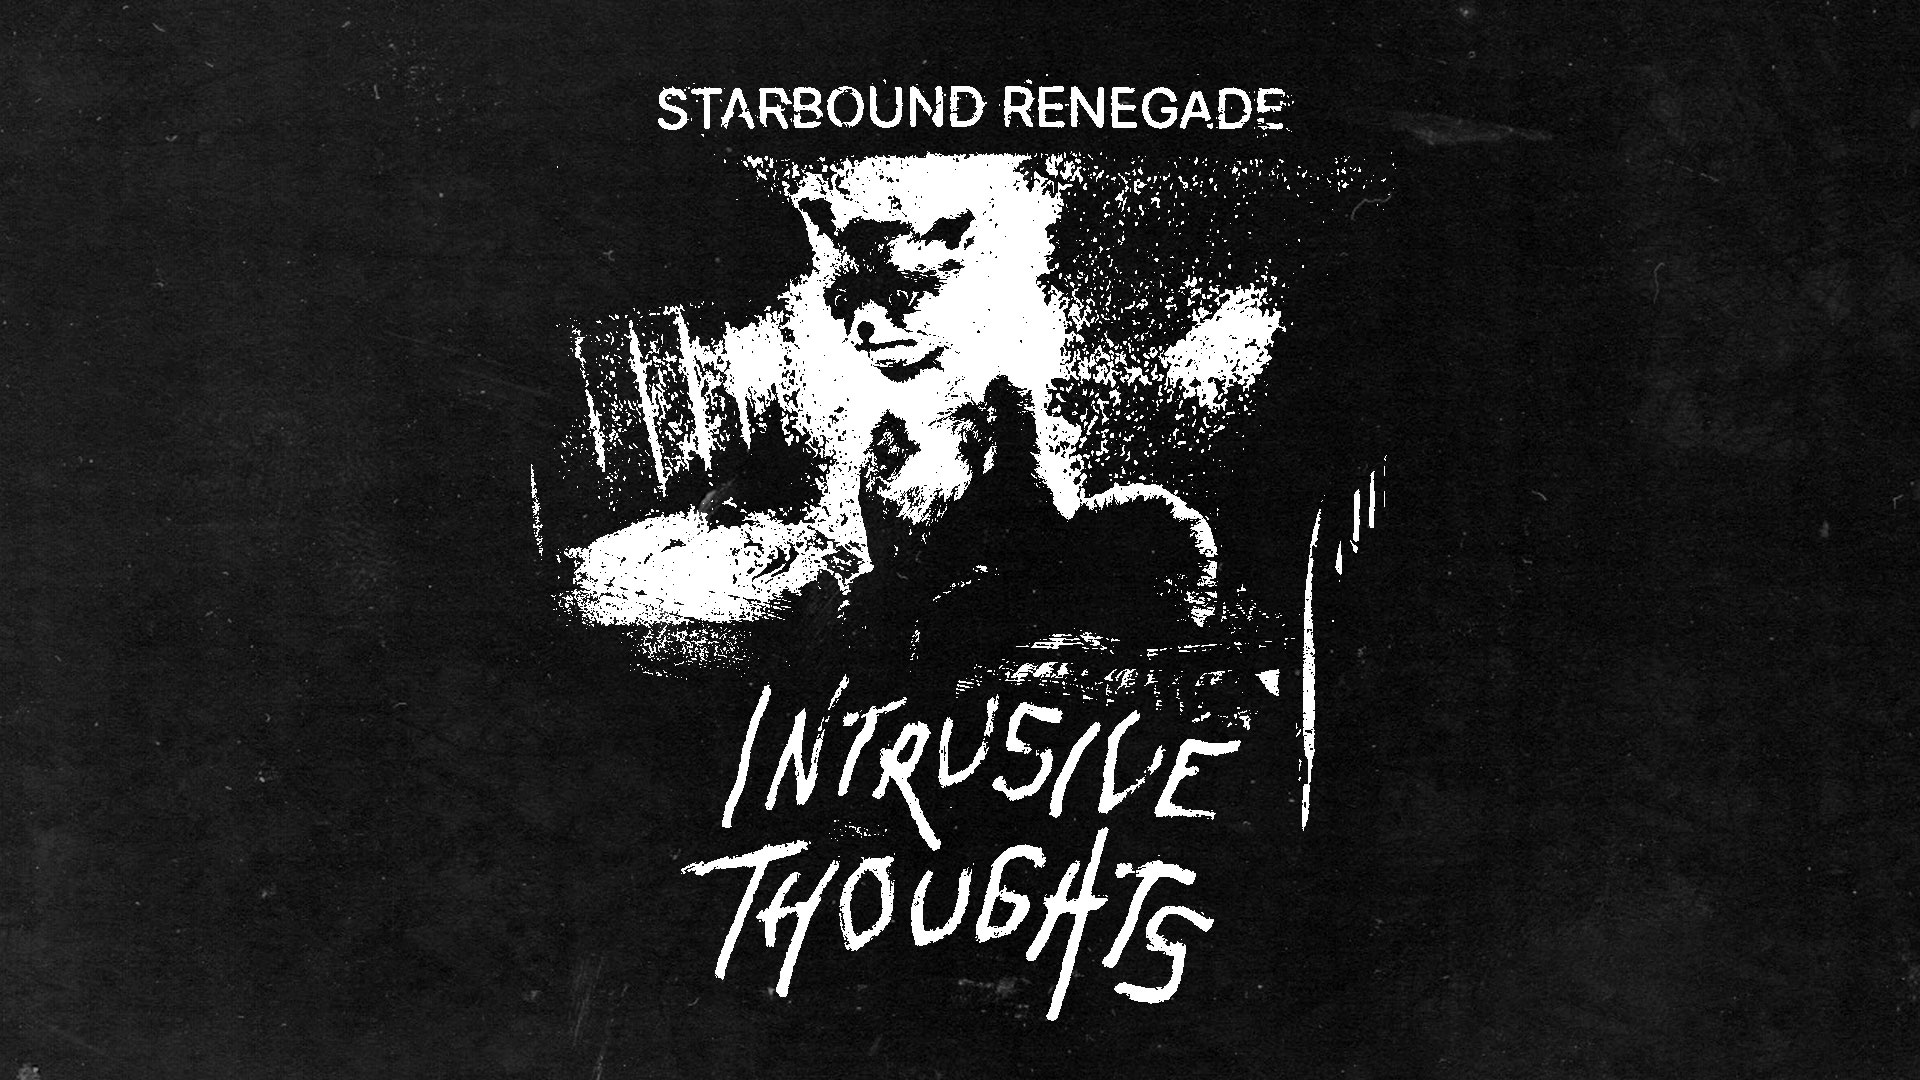 Intrusive Thoughts cover art